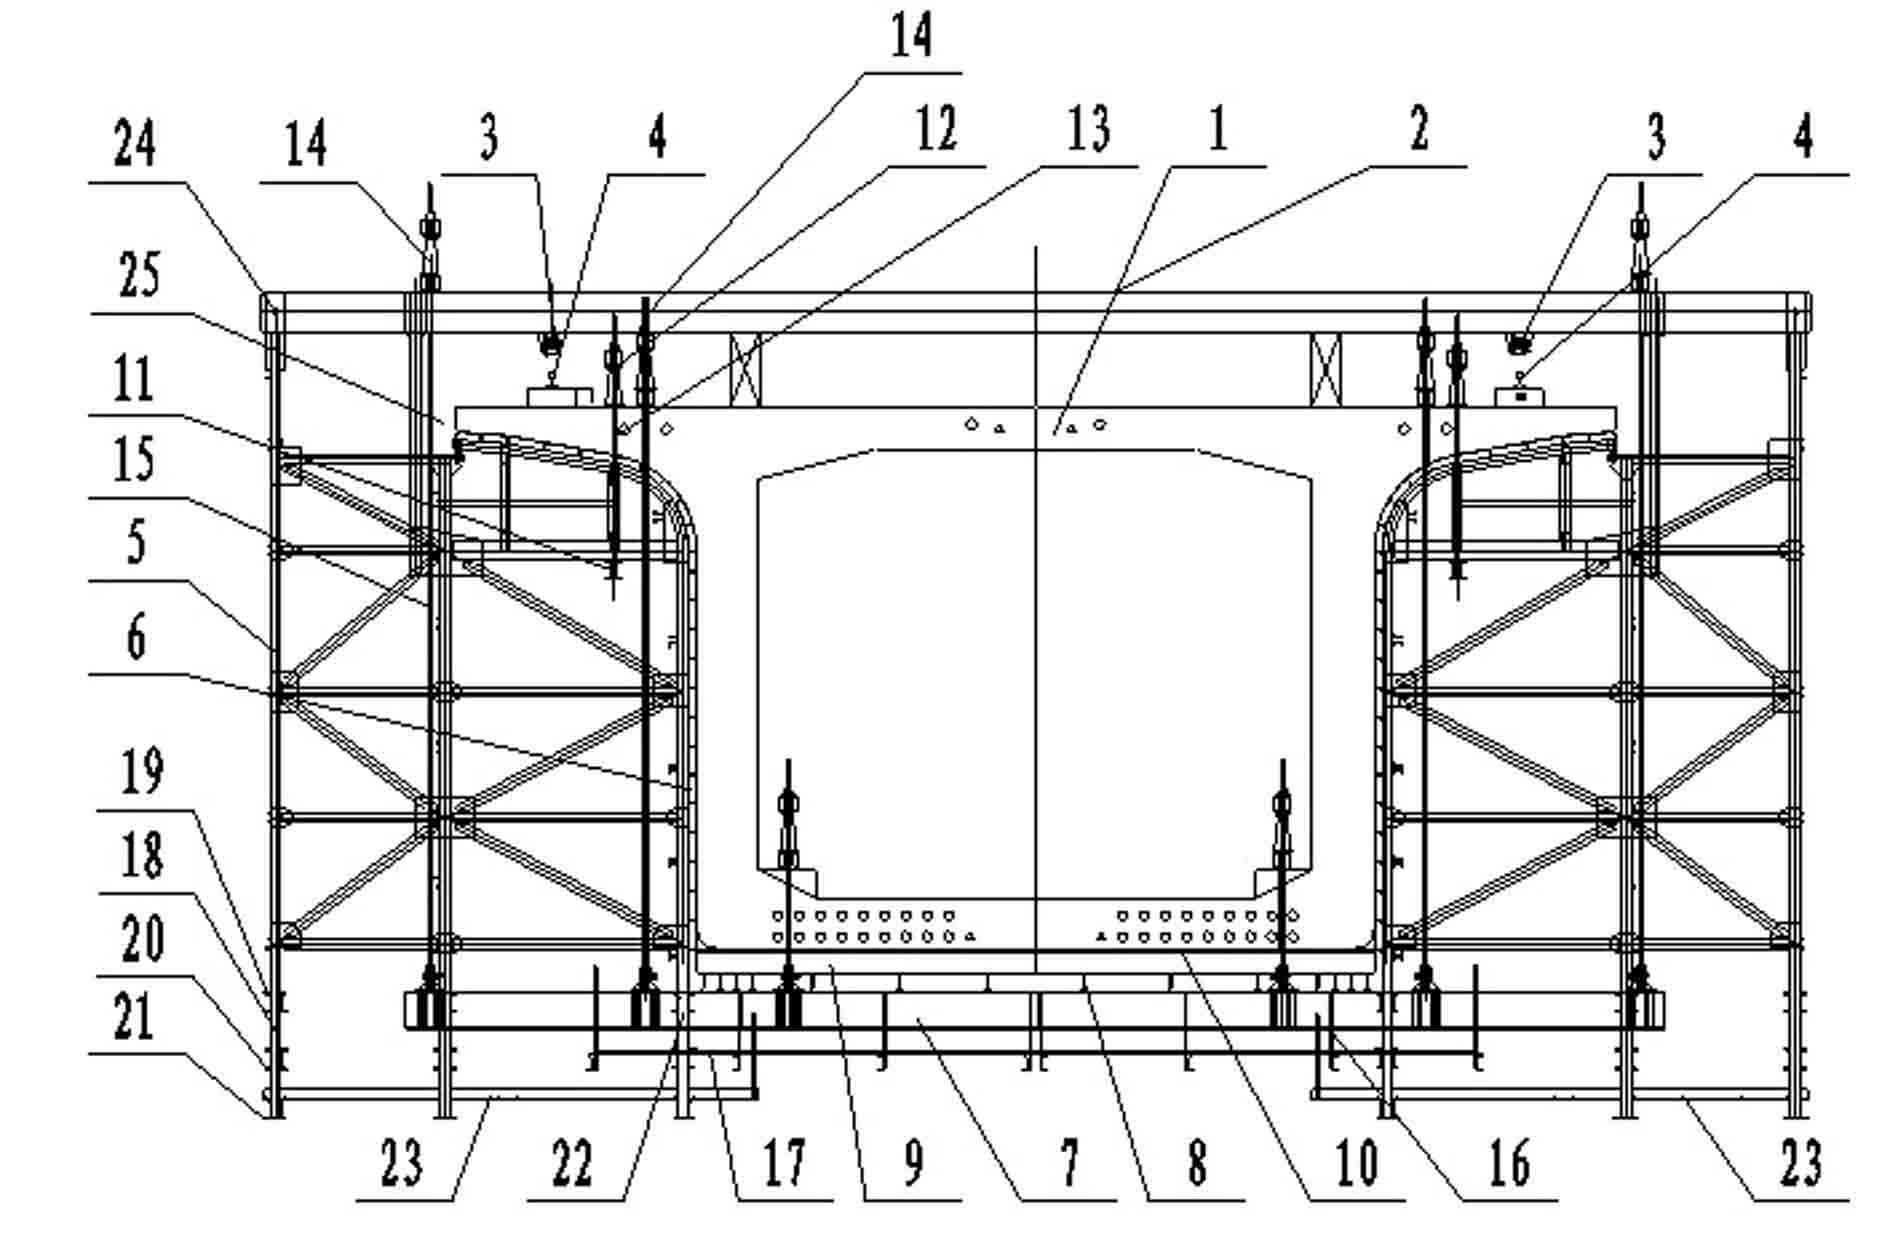 Hanging basket device for closure construction of continuous box girders